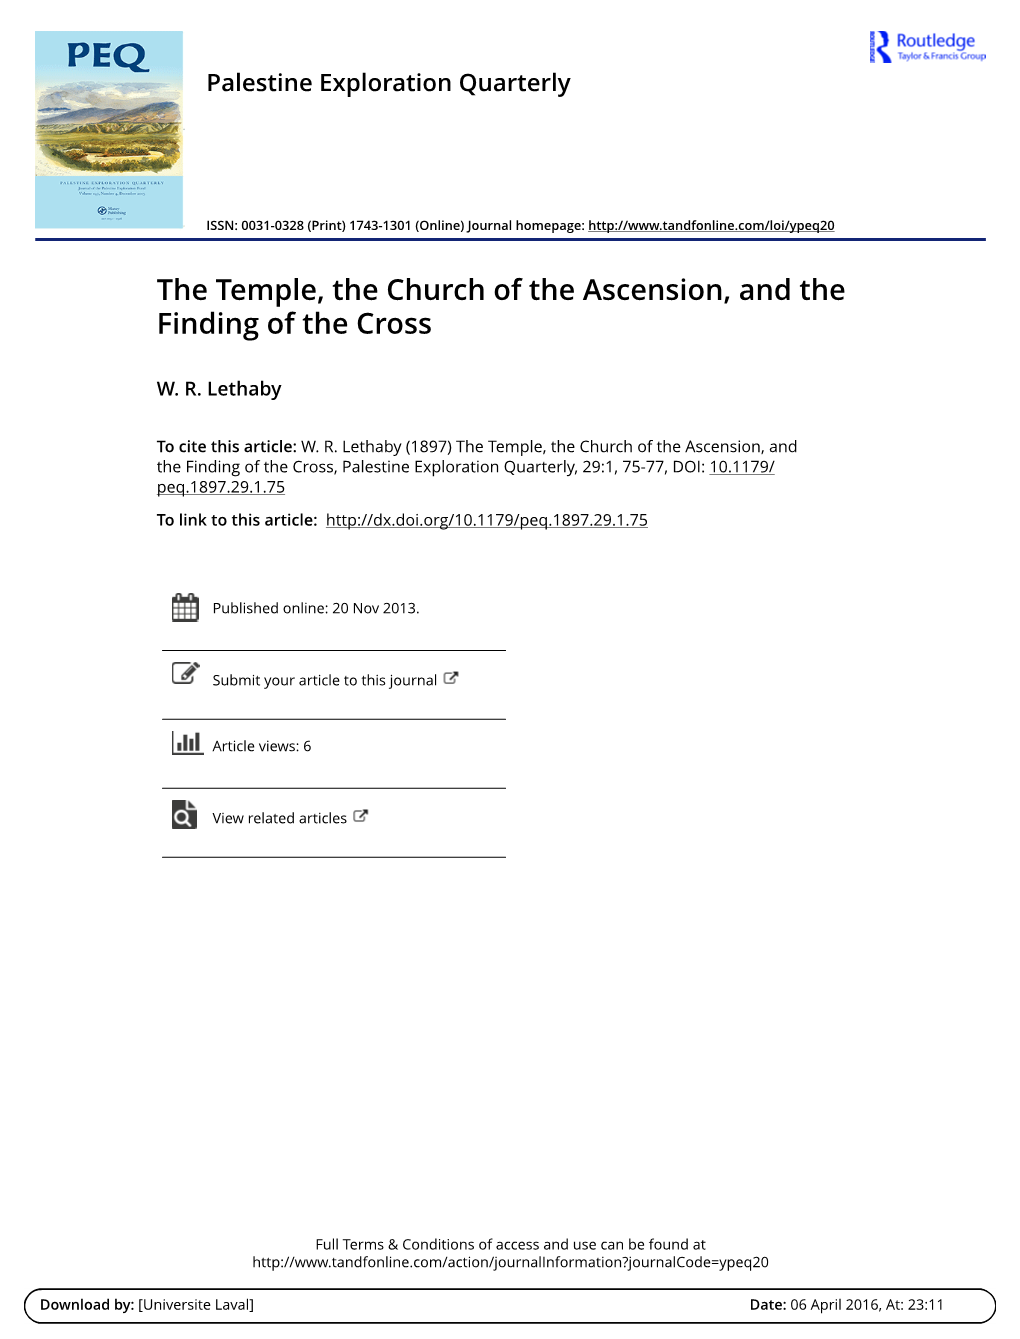 The Temple, the Church of the Ascension, and the Finding of the Cross